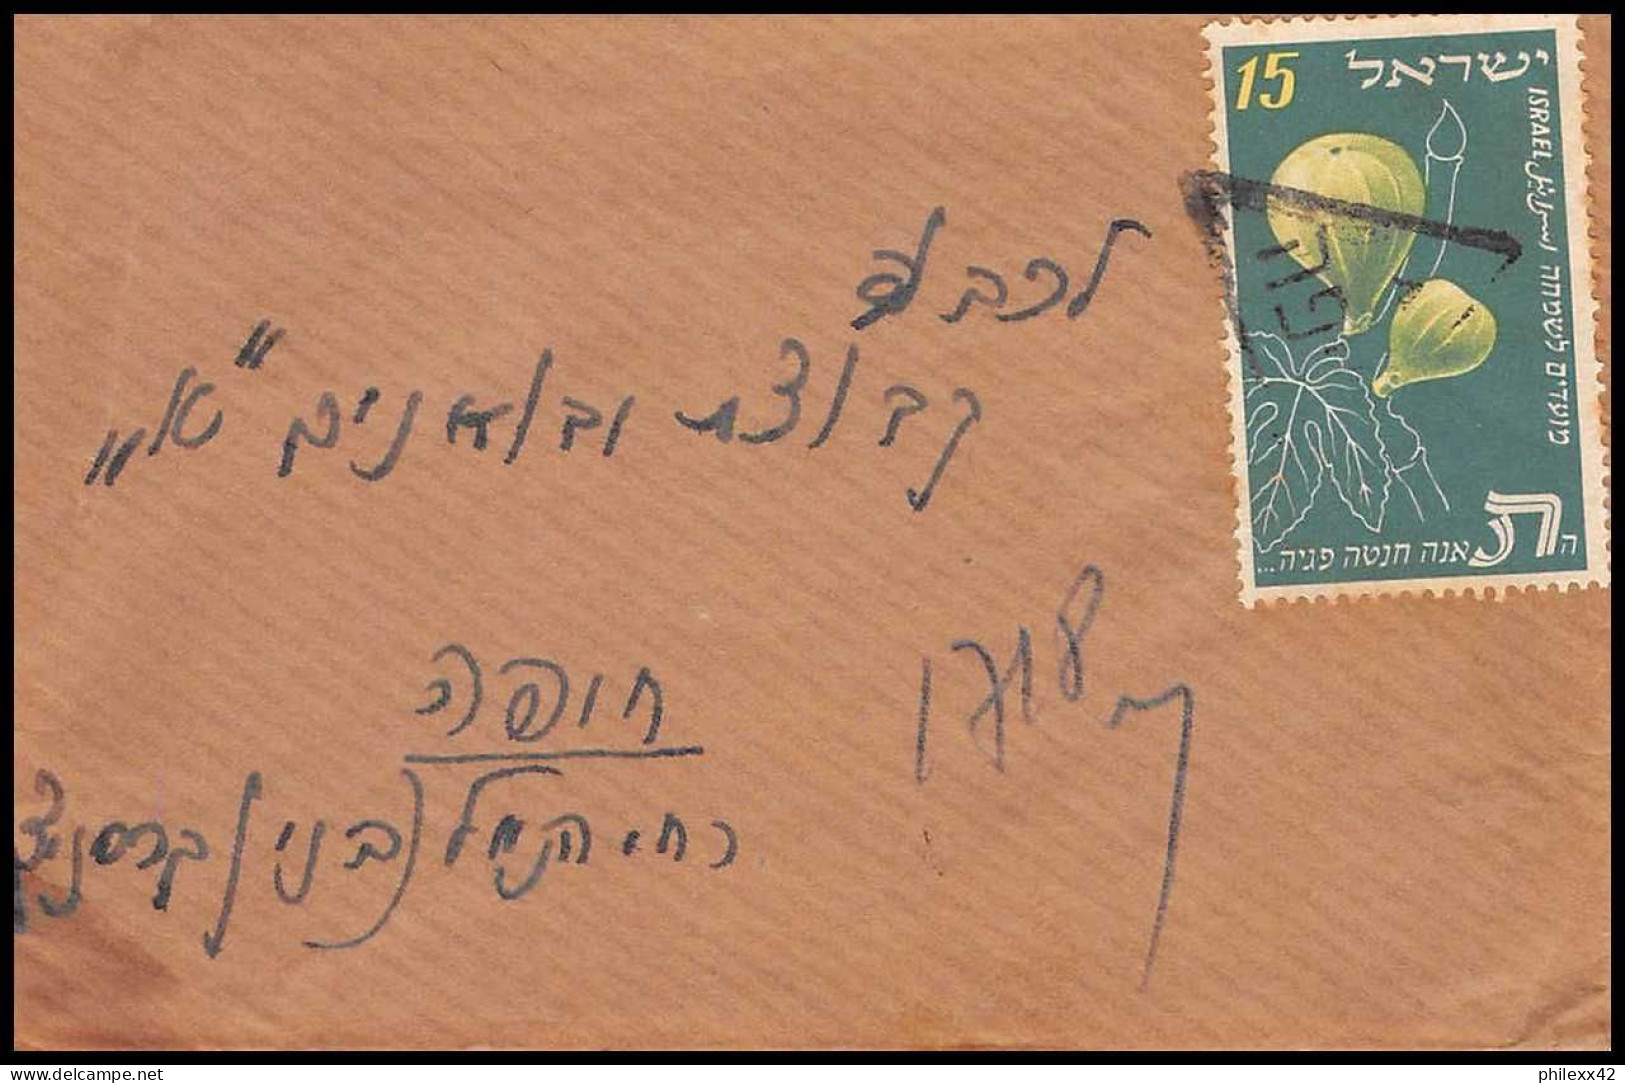 11556 N°58 NOUVEL AN 1952 collection / lot 11 lettres covers israel 